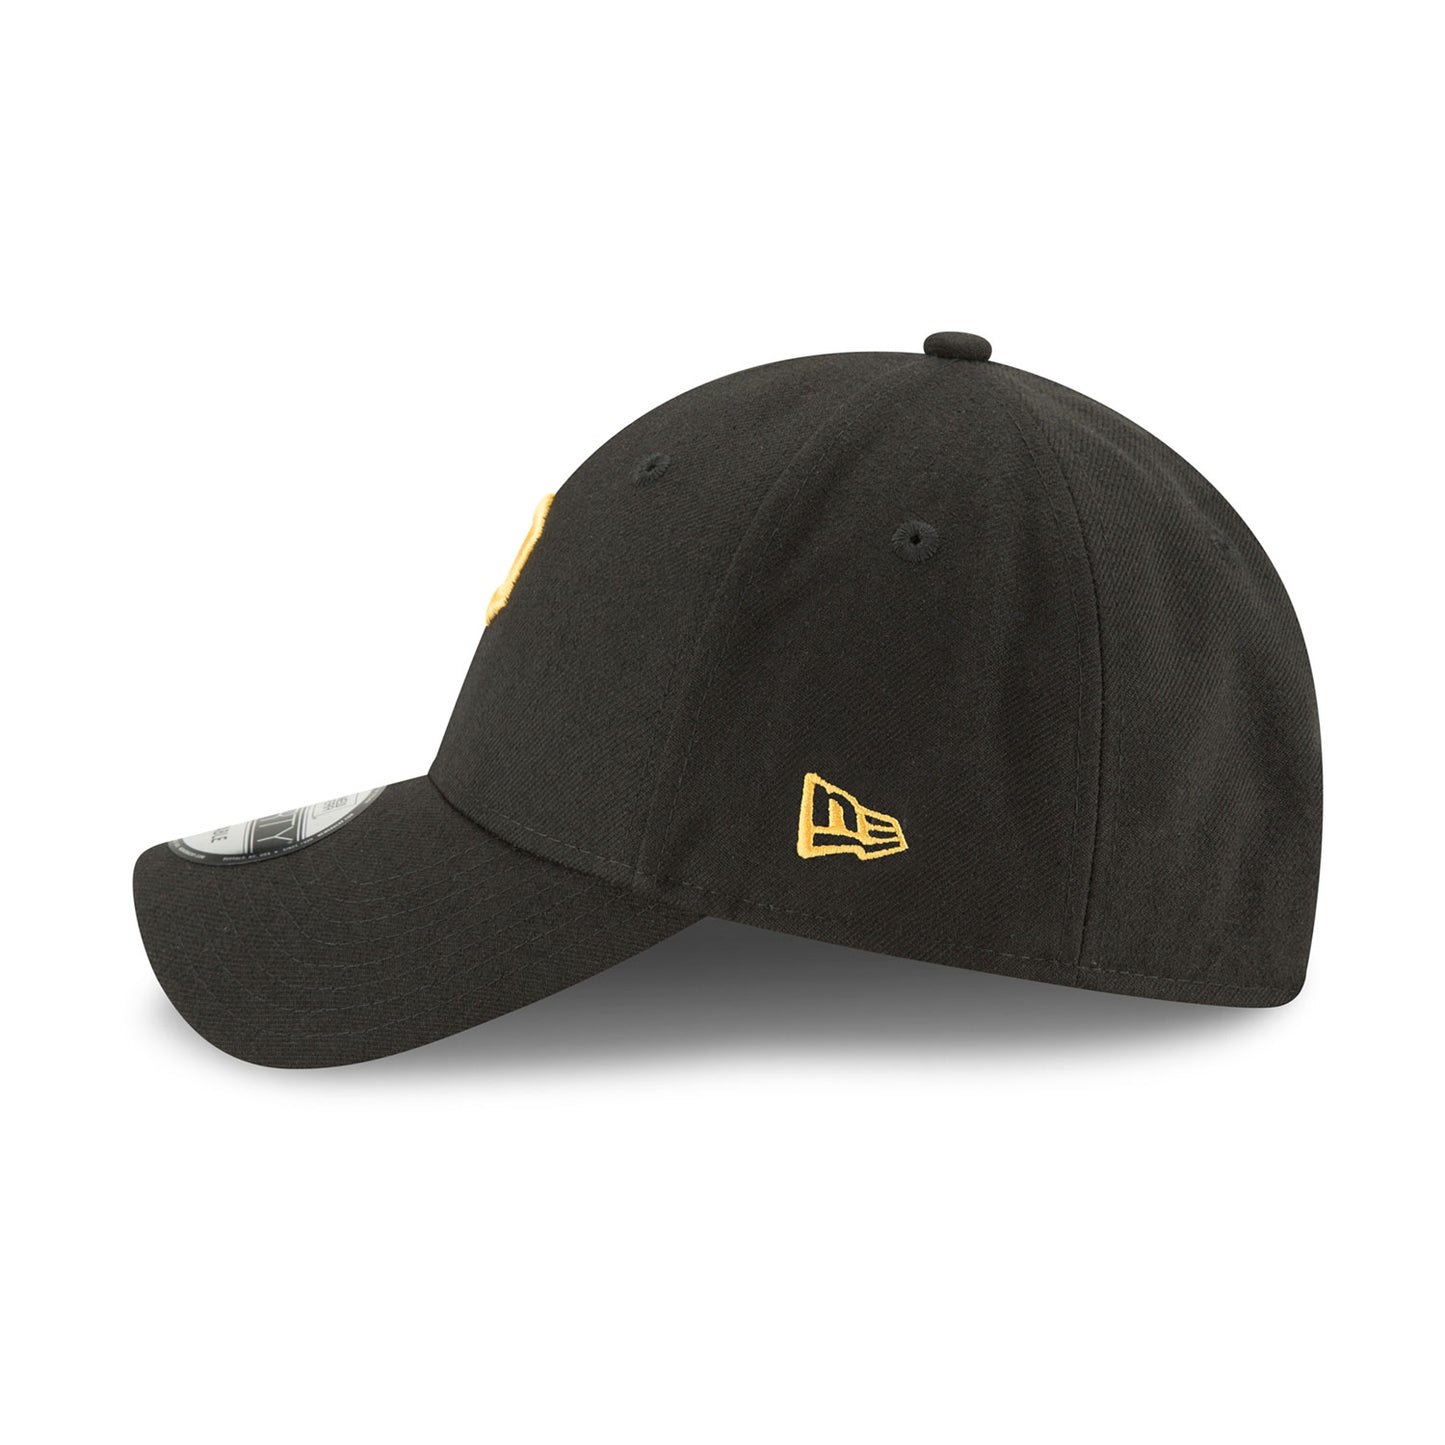 THE LEAGUE Pittsburgh Pirates 9FORTY New Era Cap